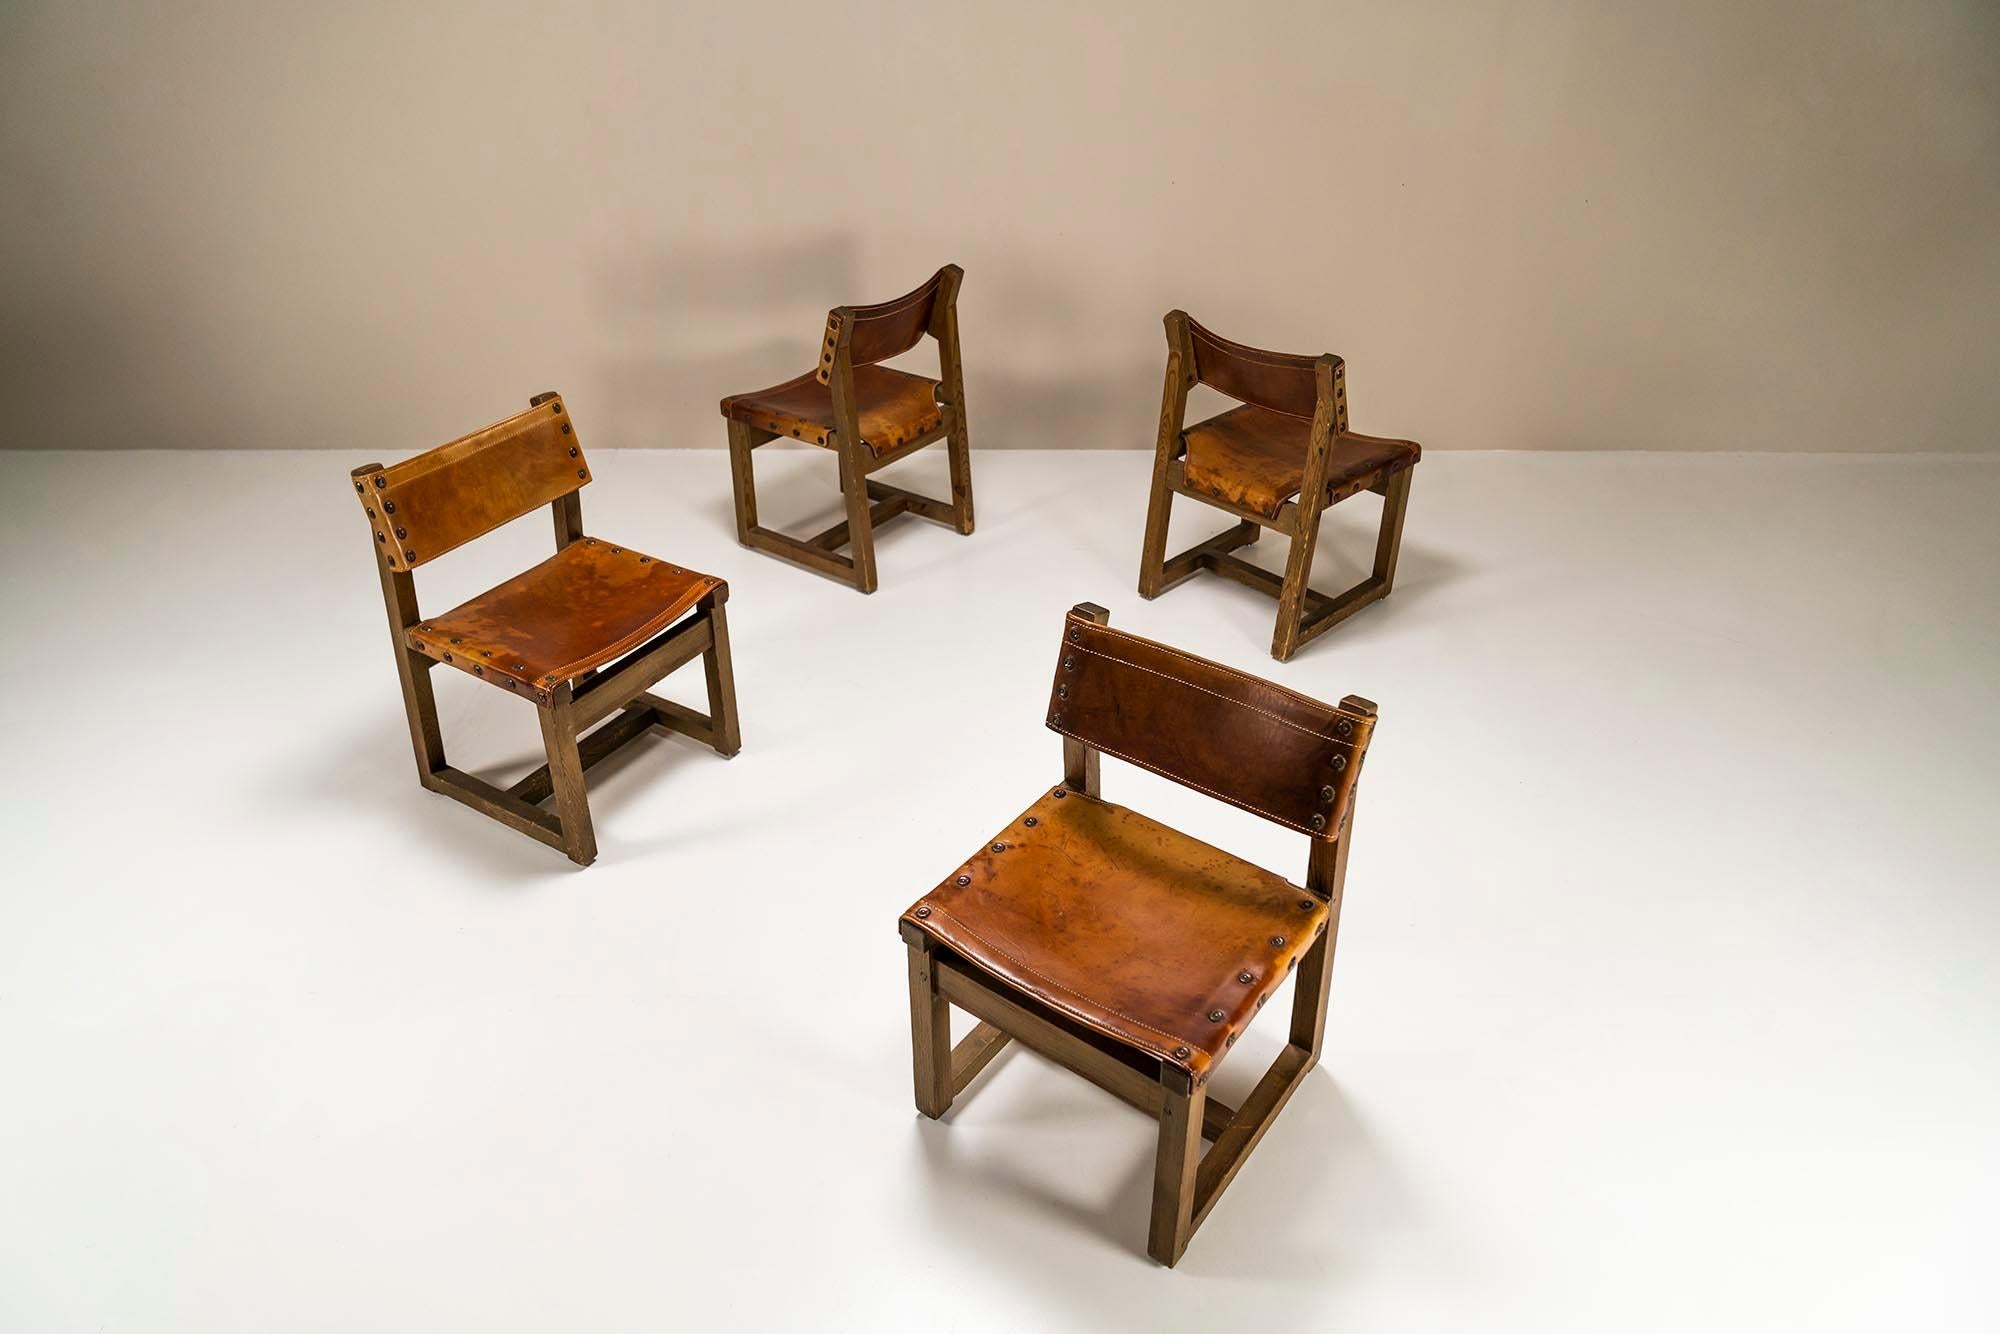 Biosca Set of 4 Chairs in Pine and Cognac Saddle Leather, Spain, 1960s In Fair Condition For Sale In Hellouw, NL